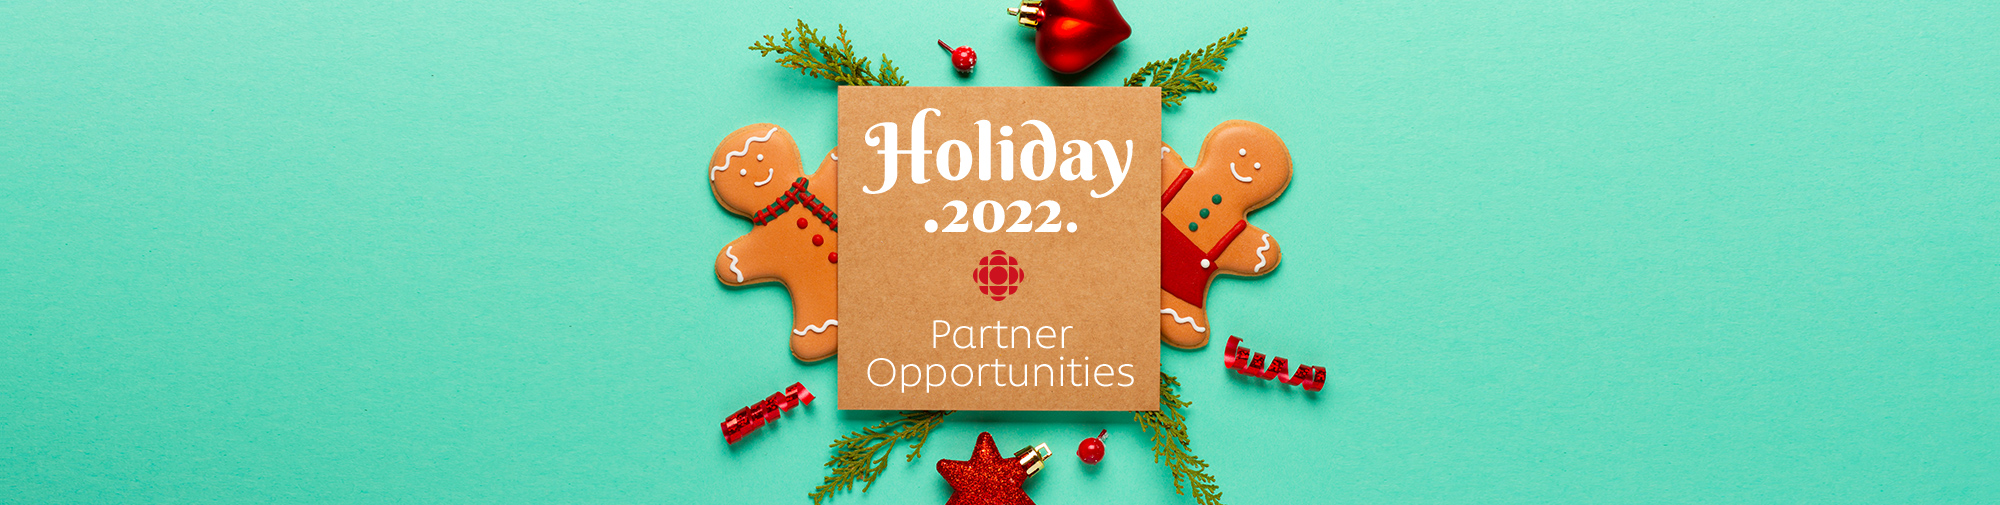 Holiday 2022 Partnership Opportunities